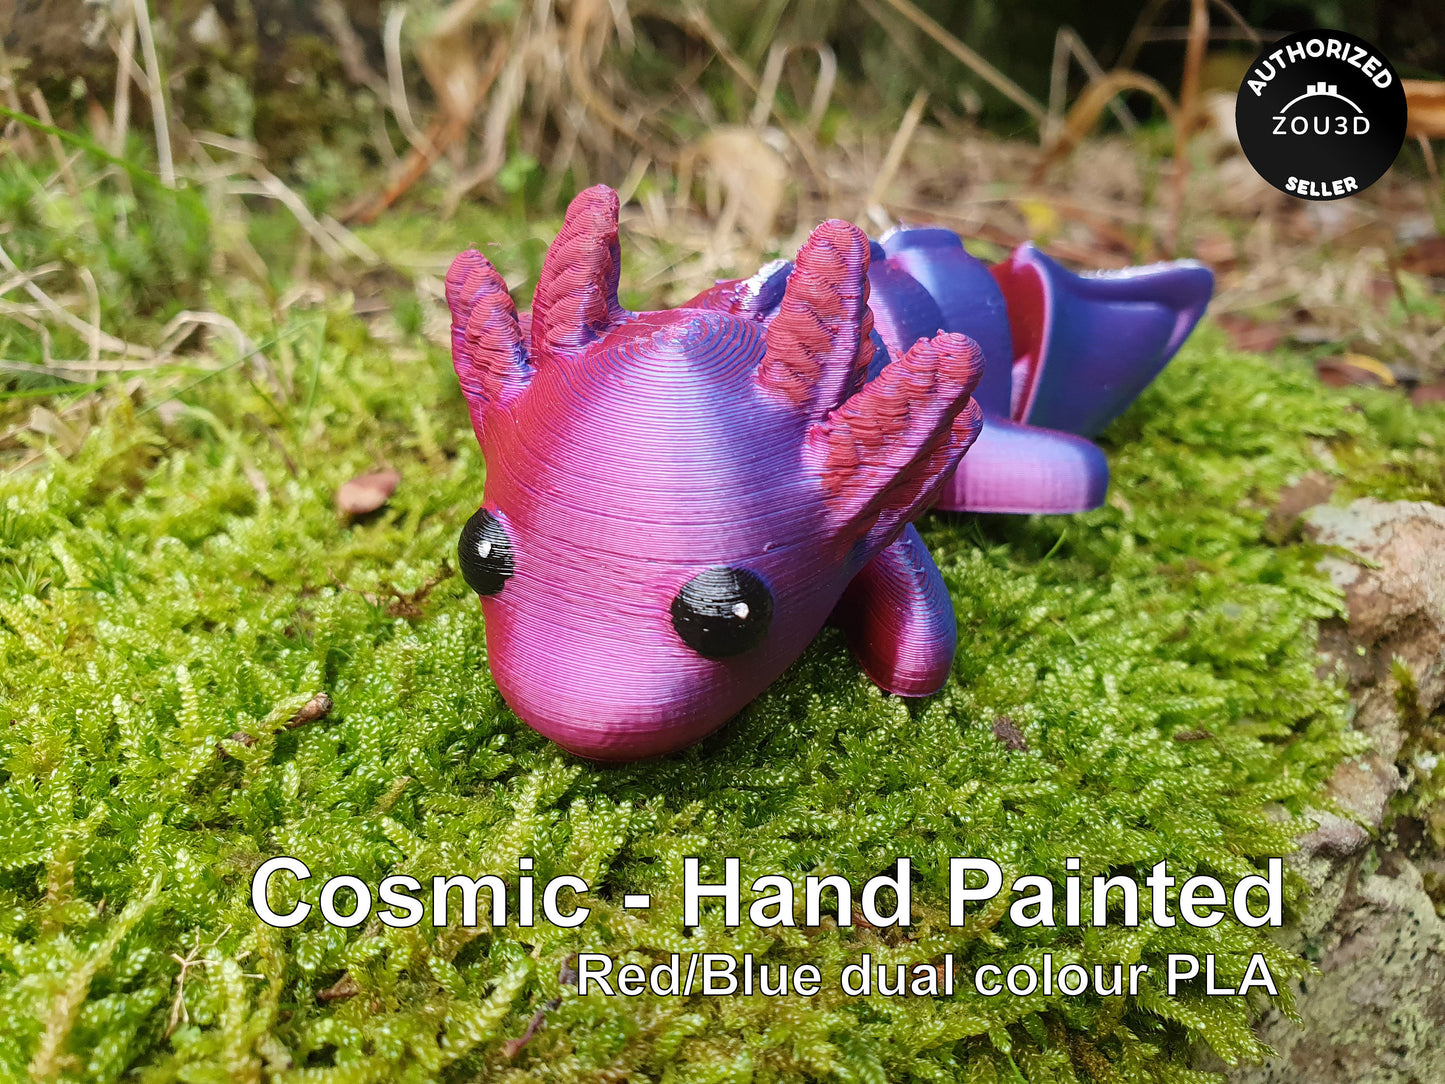 Cute Baby Axolotl - Articulated Flexible 3D Print. Professionally Hand painted finishing details